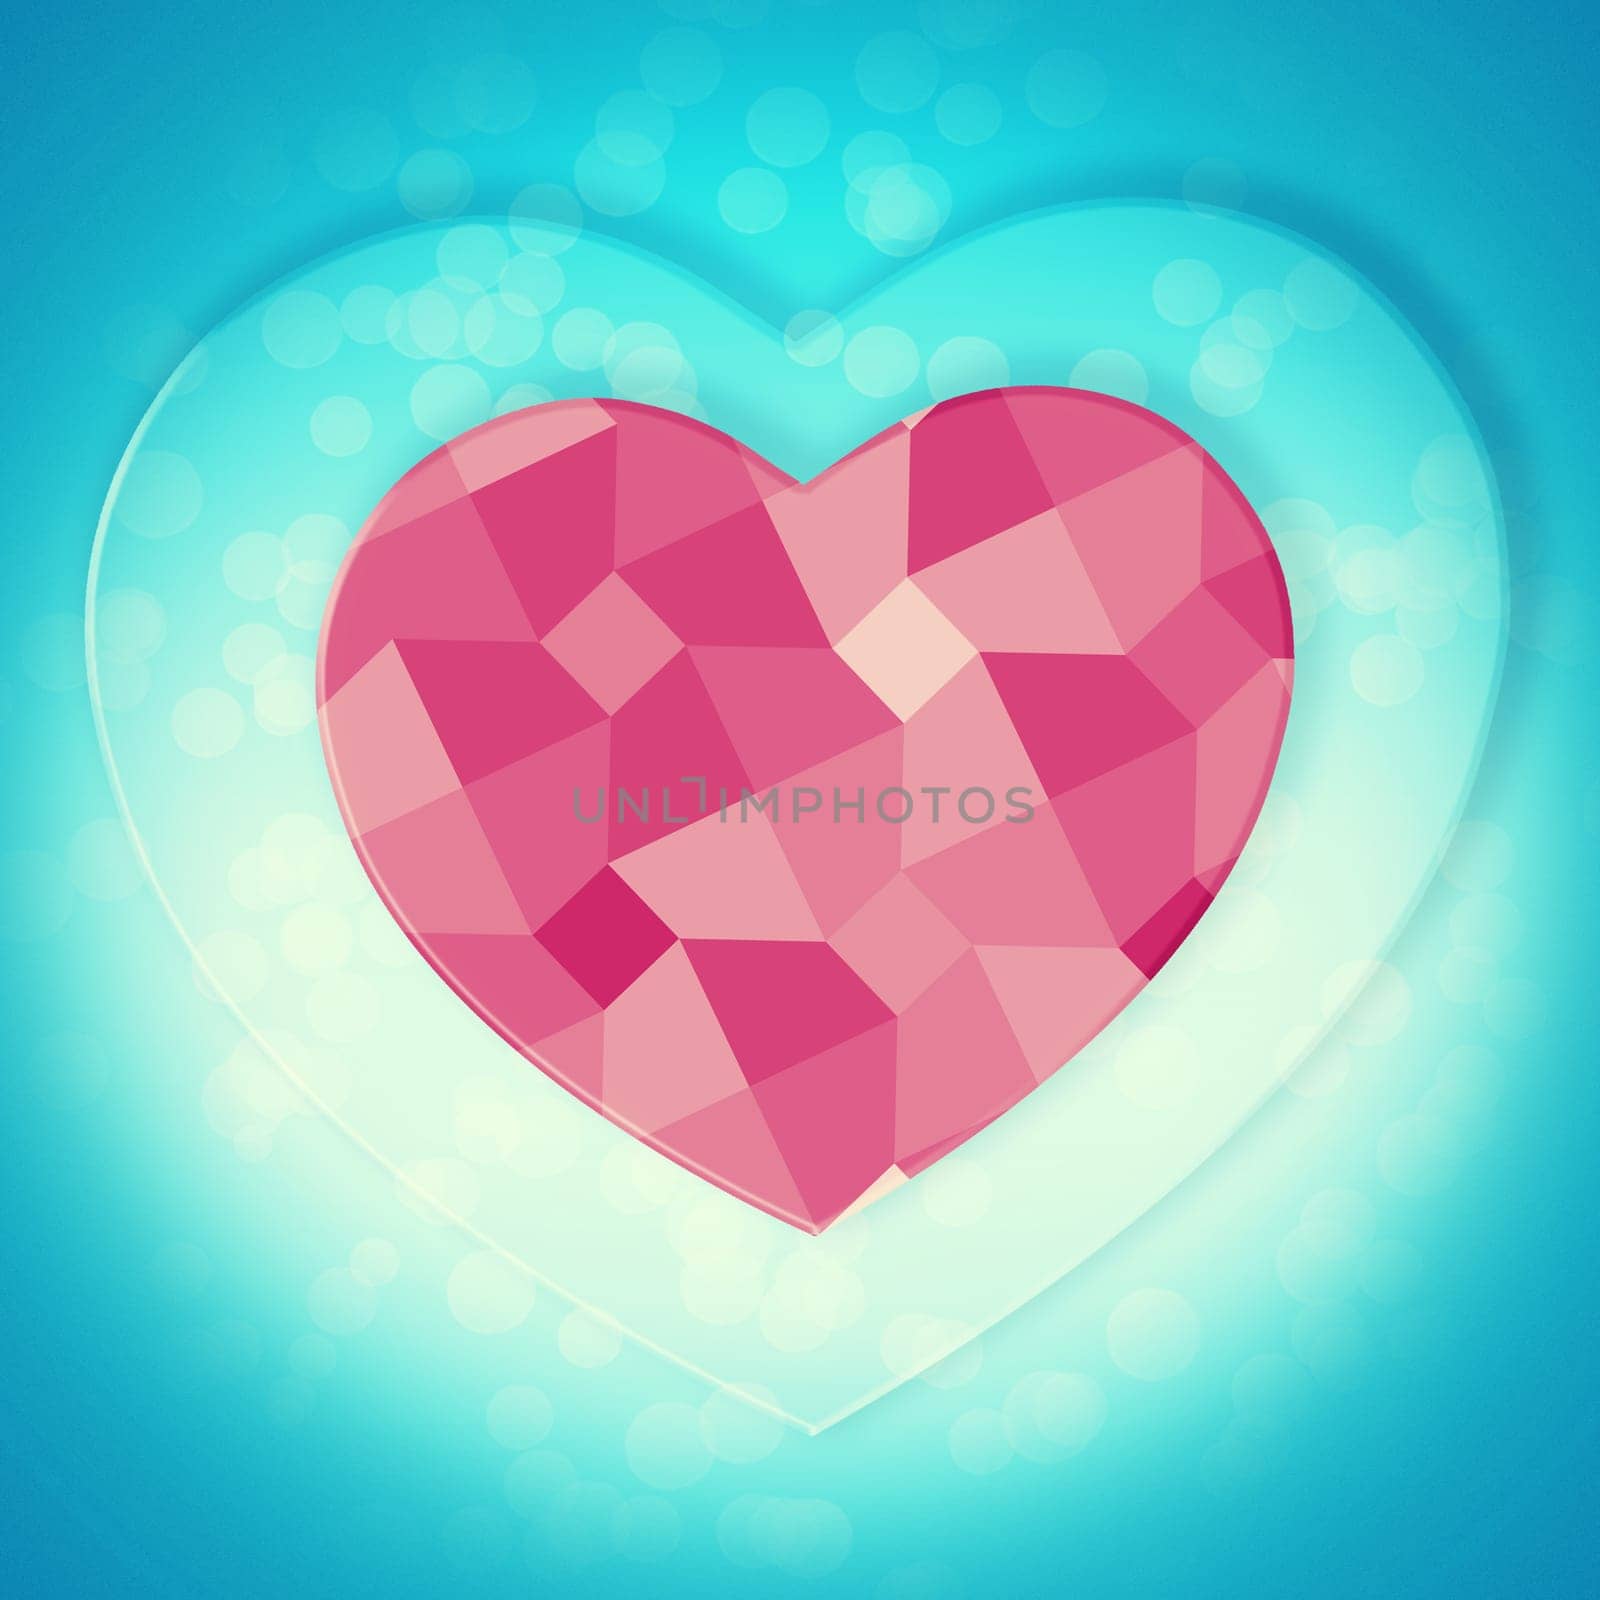 Graphic, pixel and hearts for symbol of love for support, emotional connection and pink artwork. Blue background, creative or illustration wallpaper isolated in studio for care, design or romance by YuriArcurs